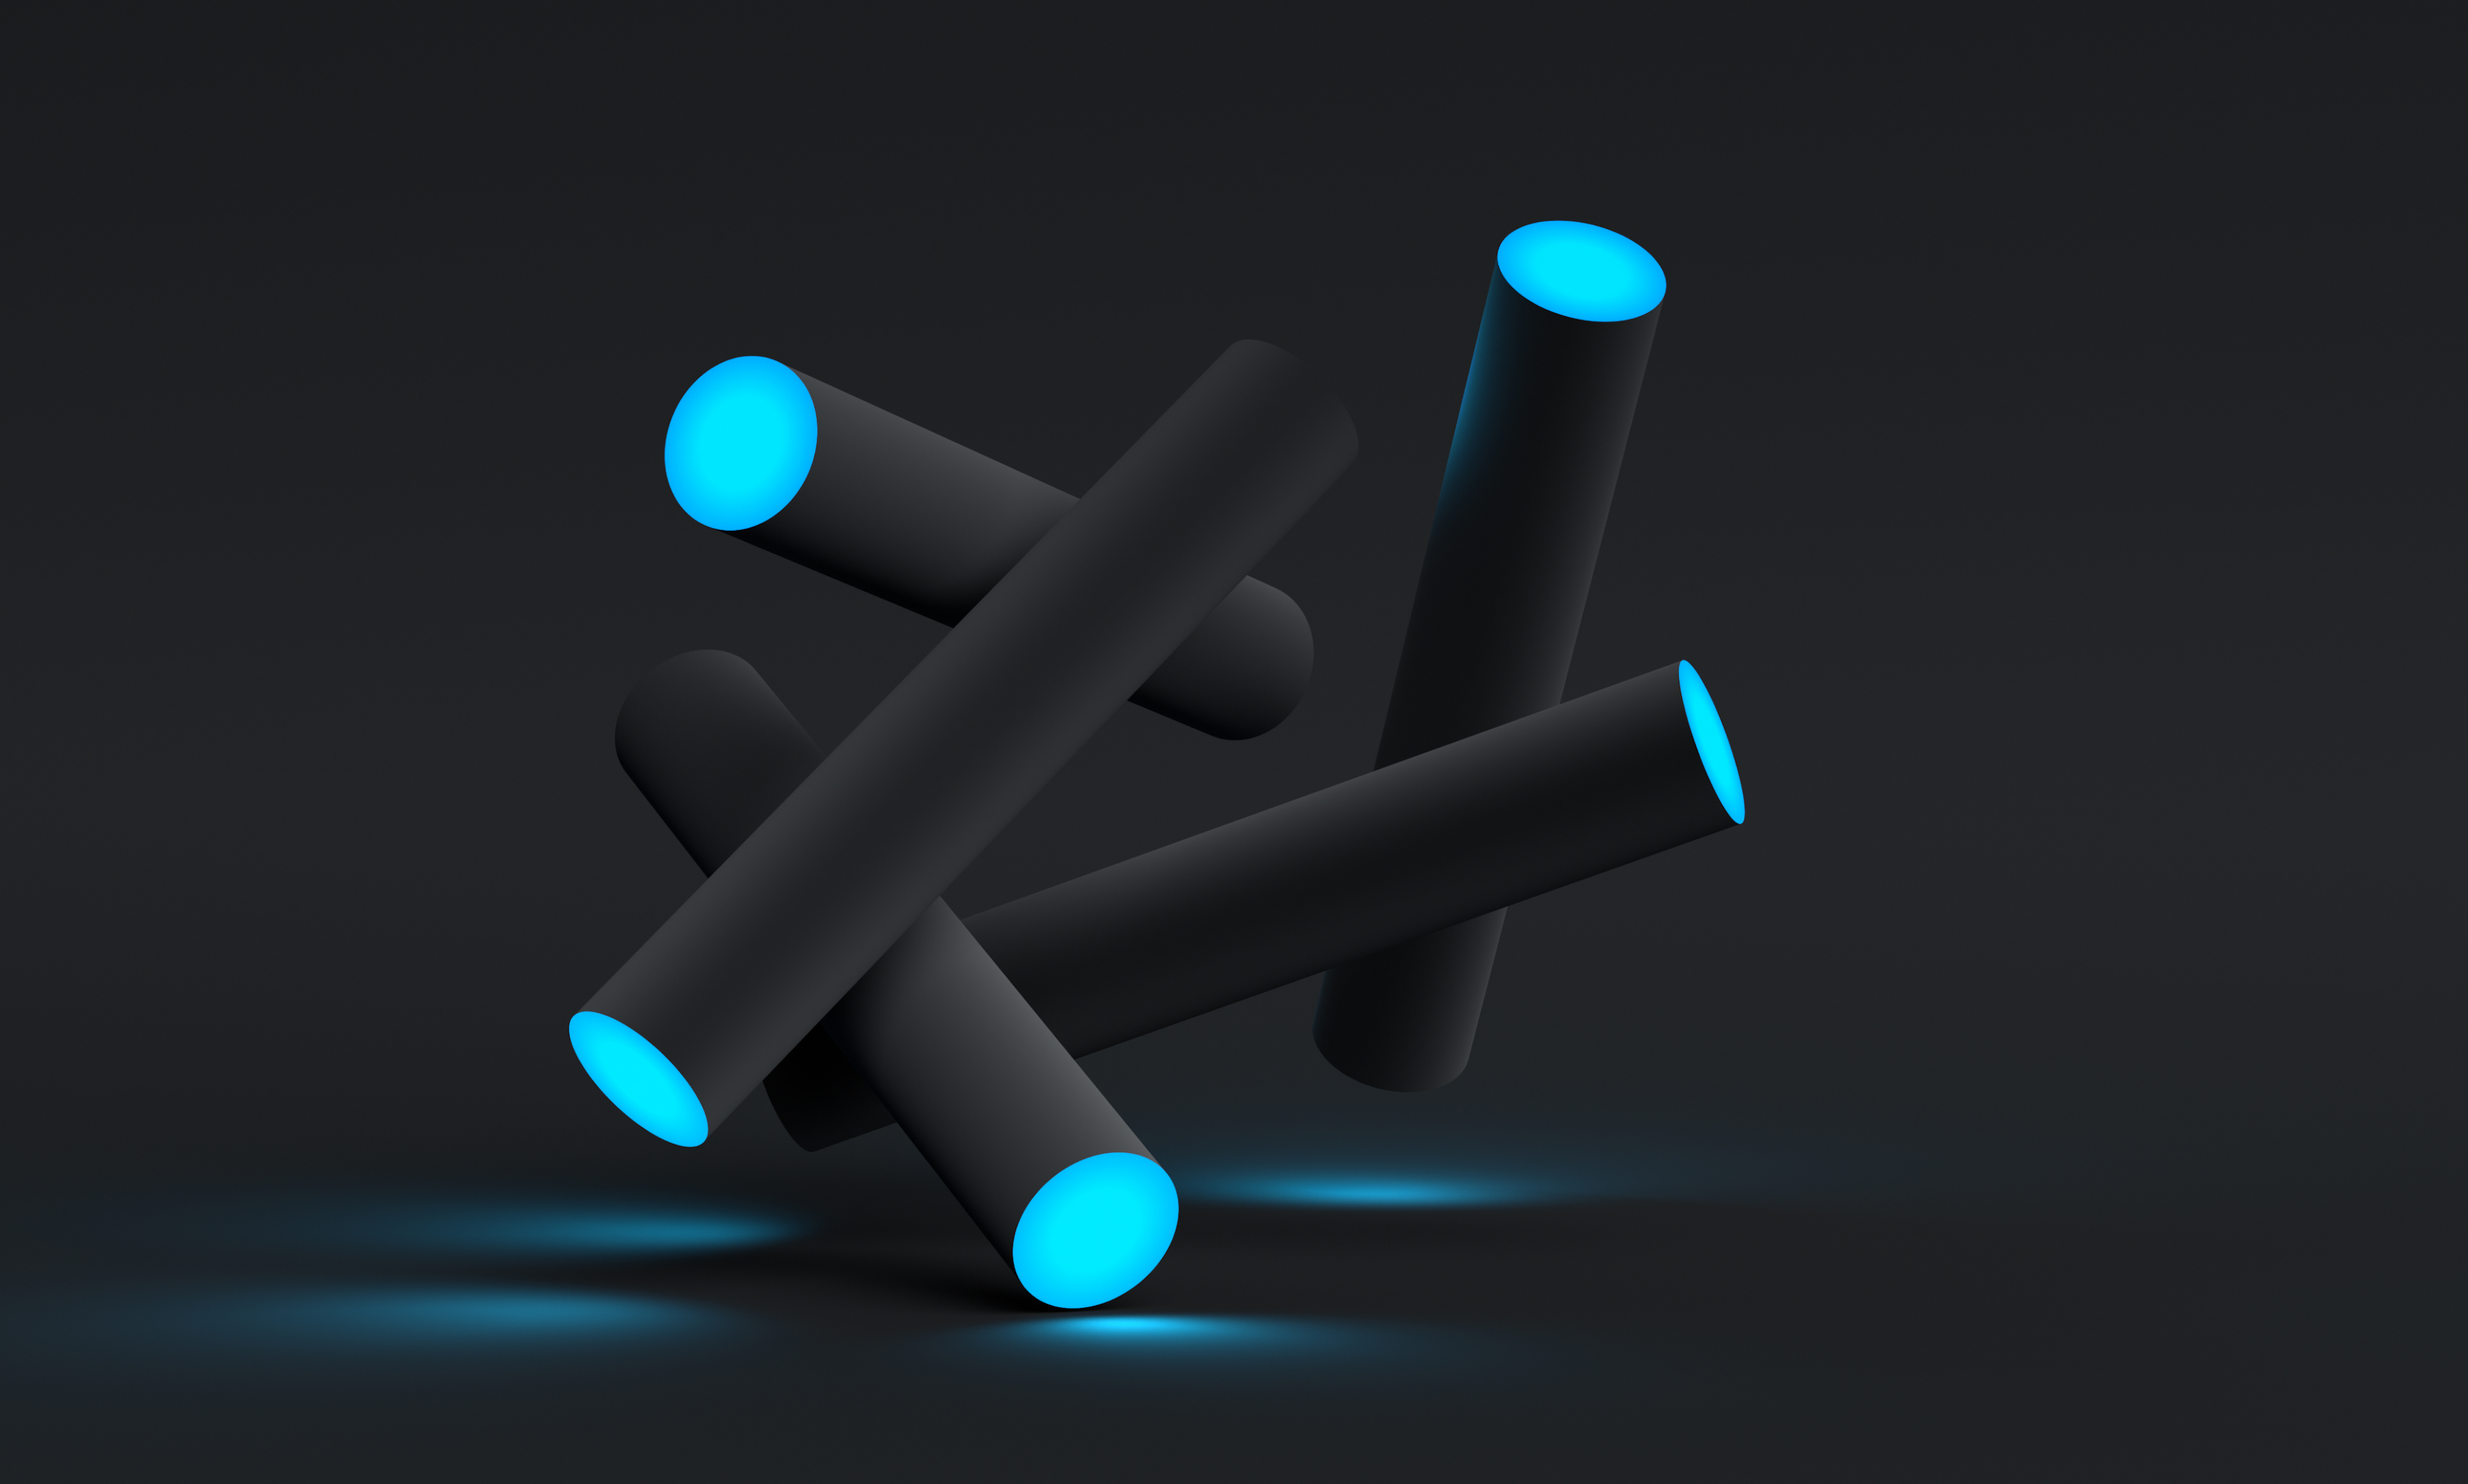 a cluster or black pipes with glowing blue ends on a dark background.